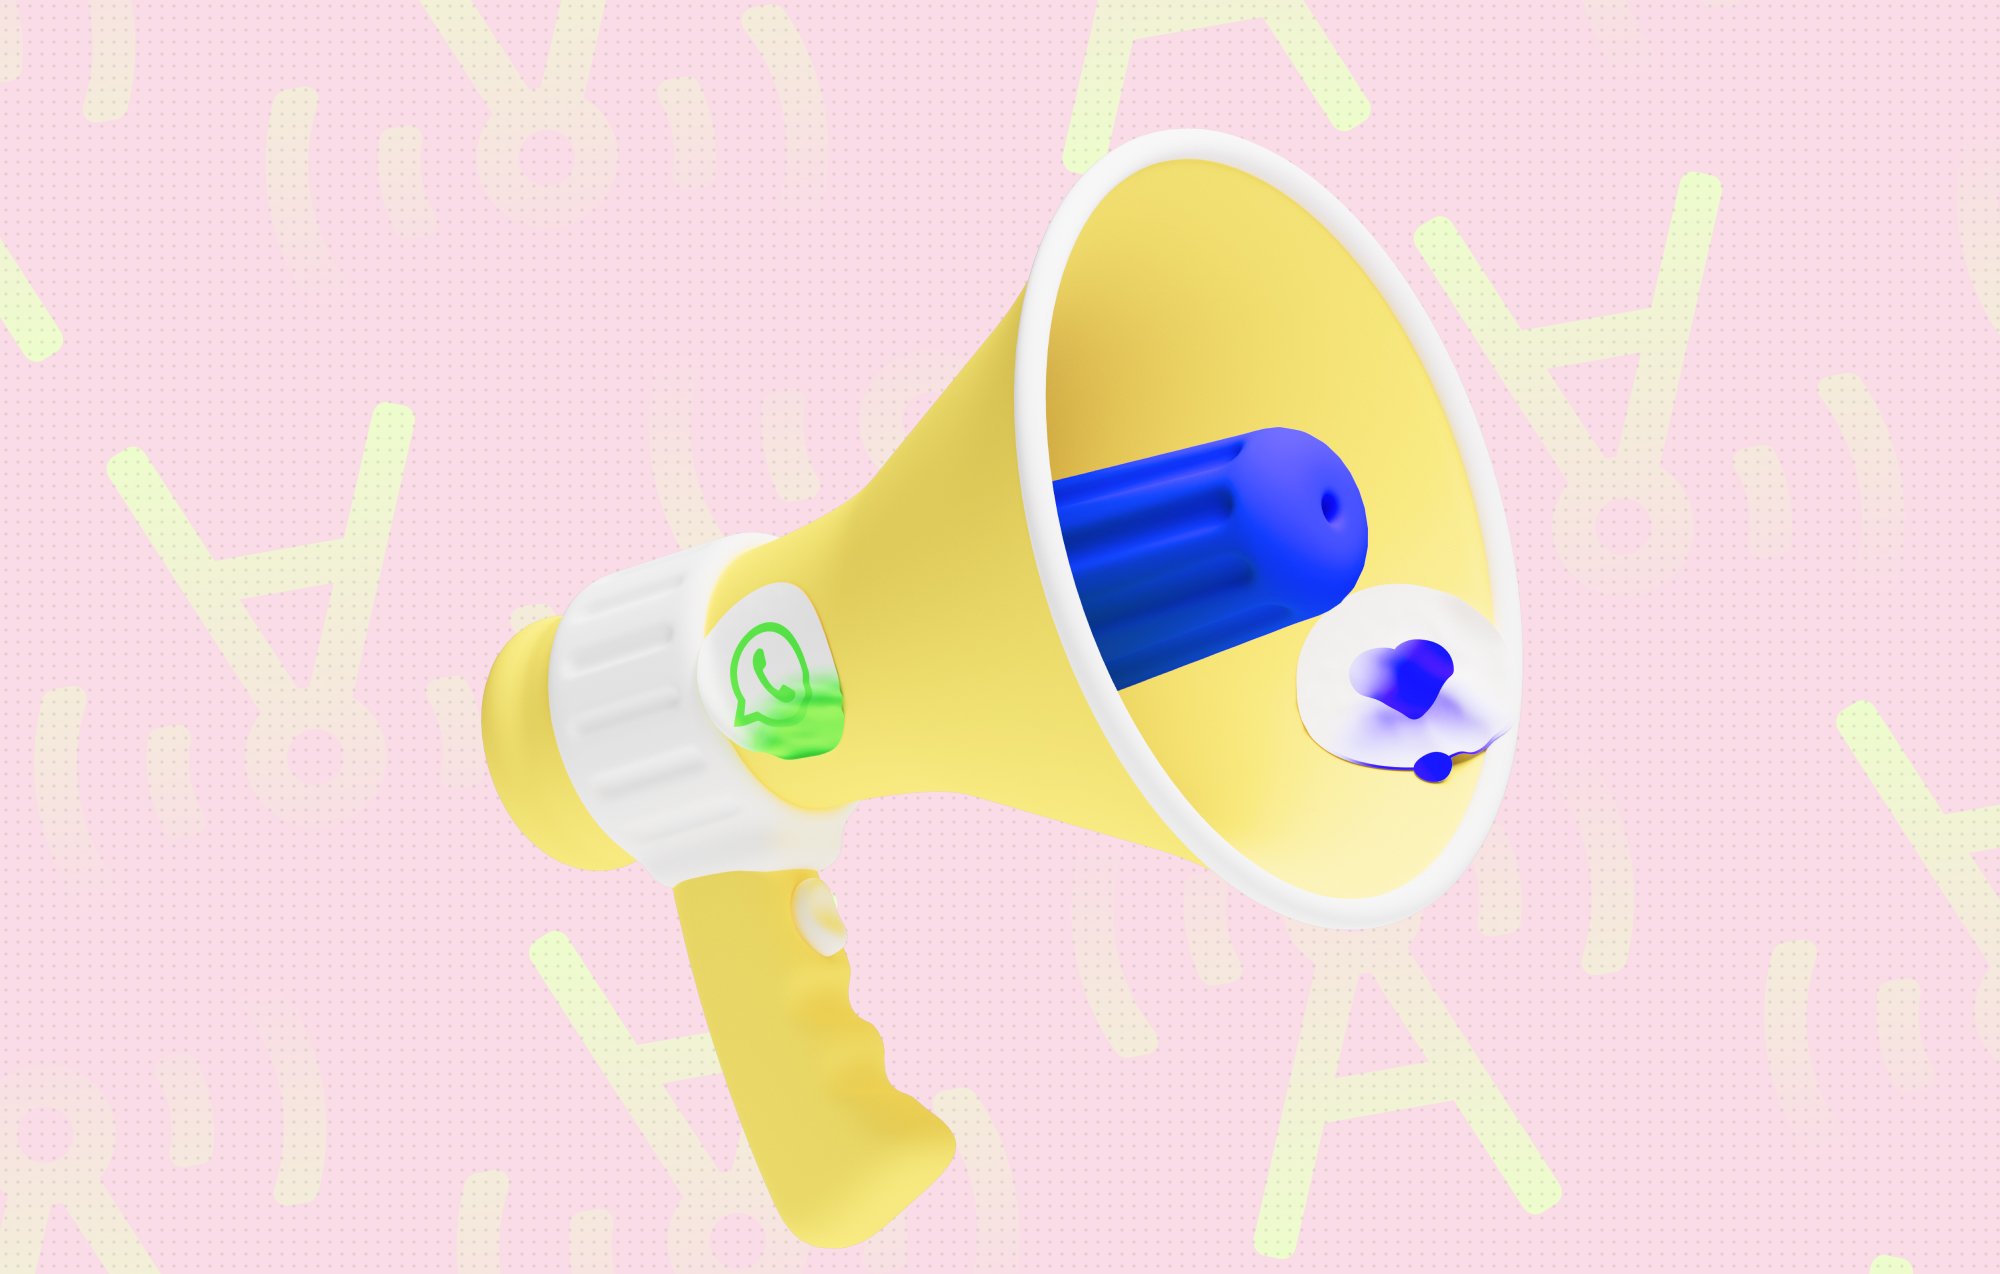 Yellow megaphone on a pink background with WhatsApp logo, for charles blog post about WhatsApp Channels